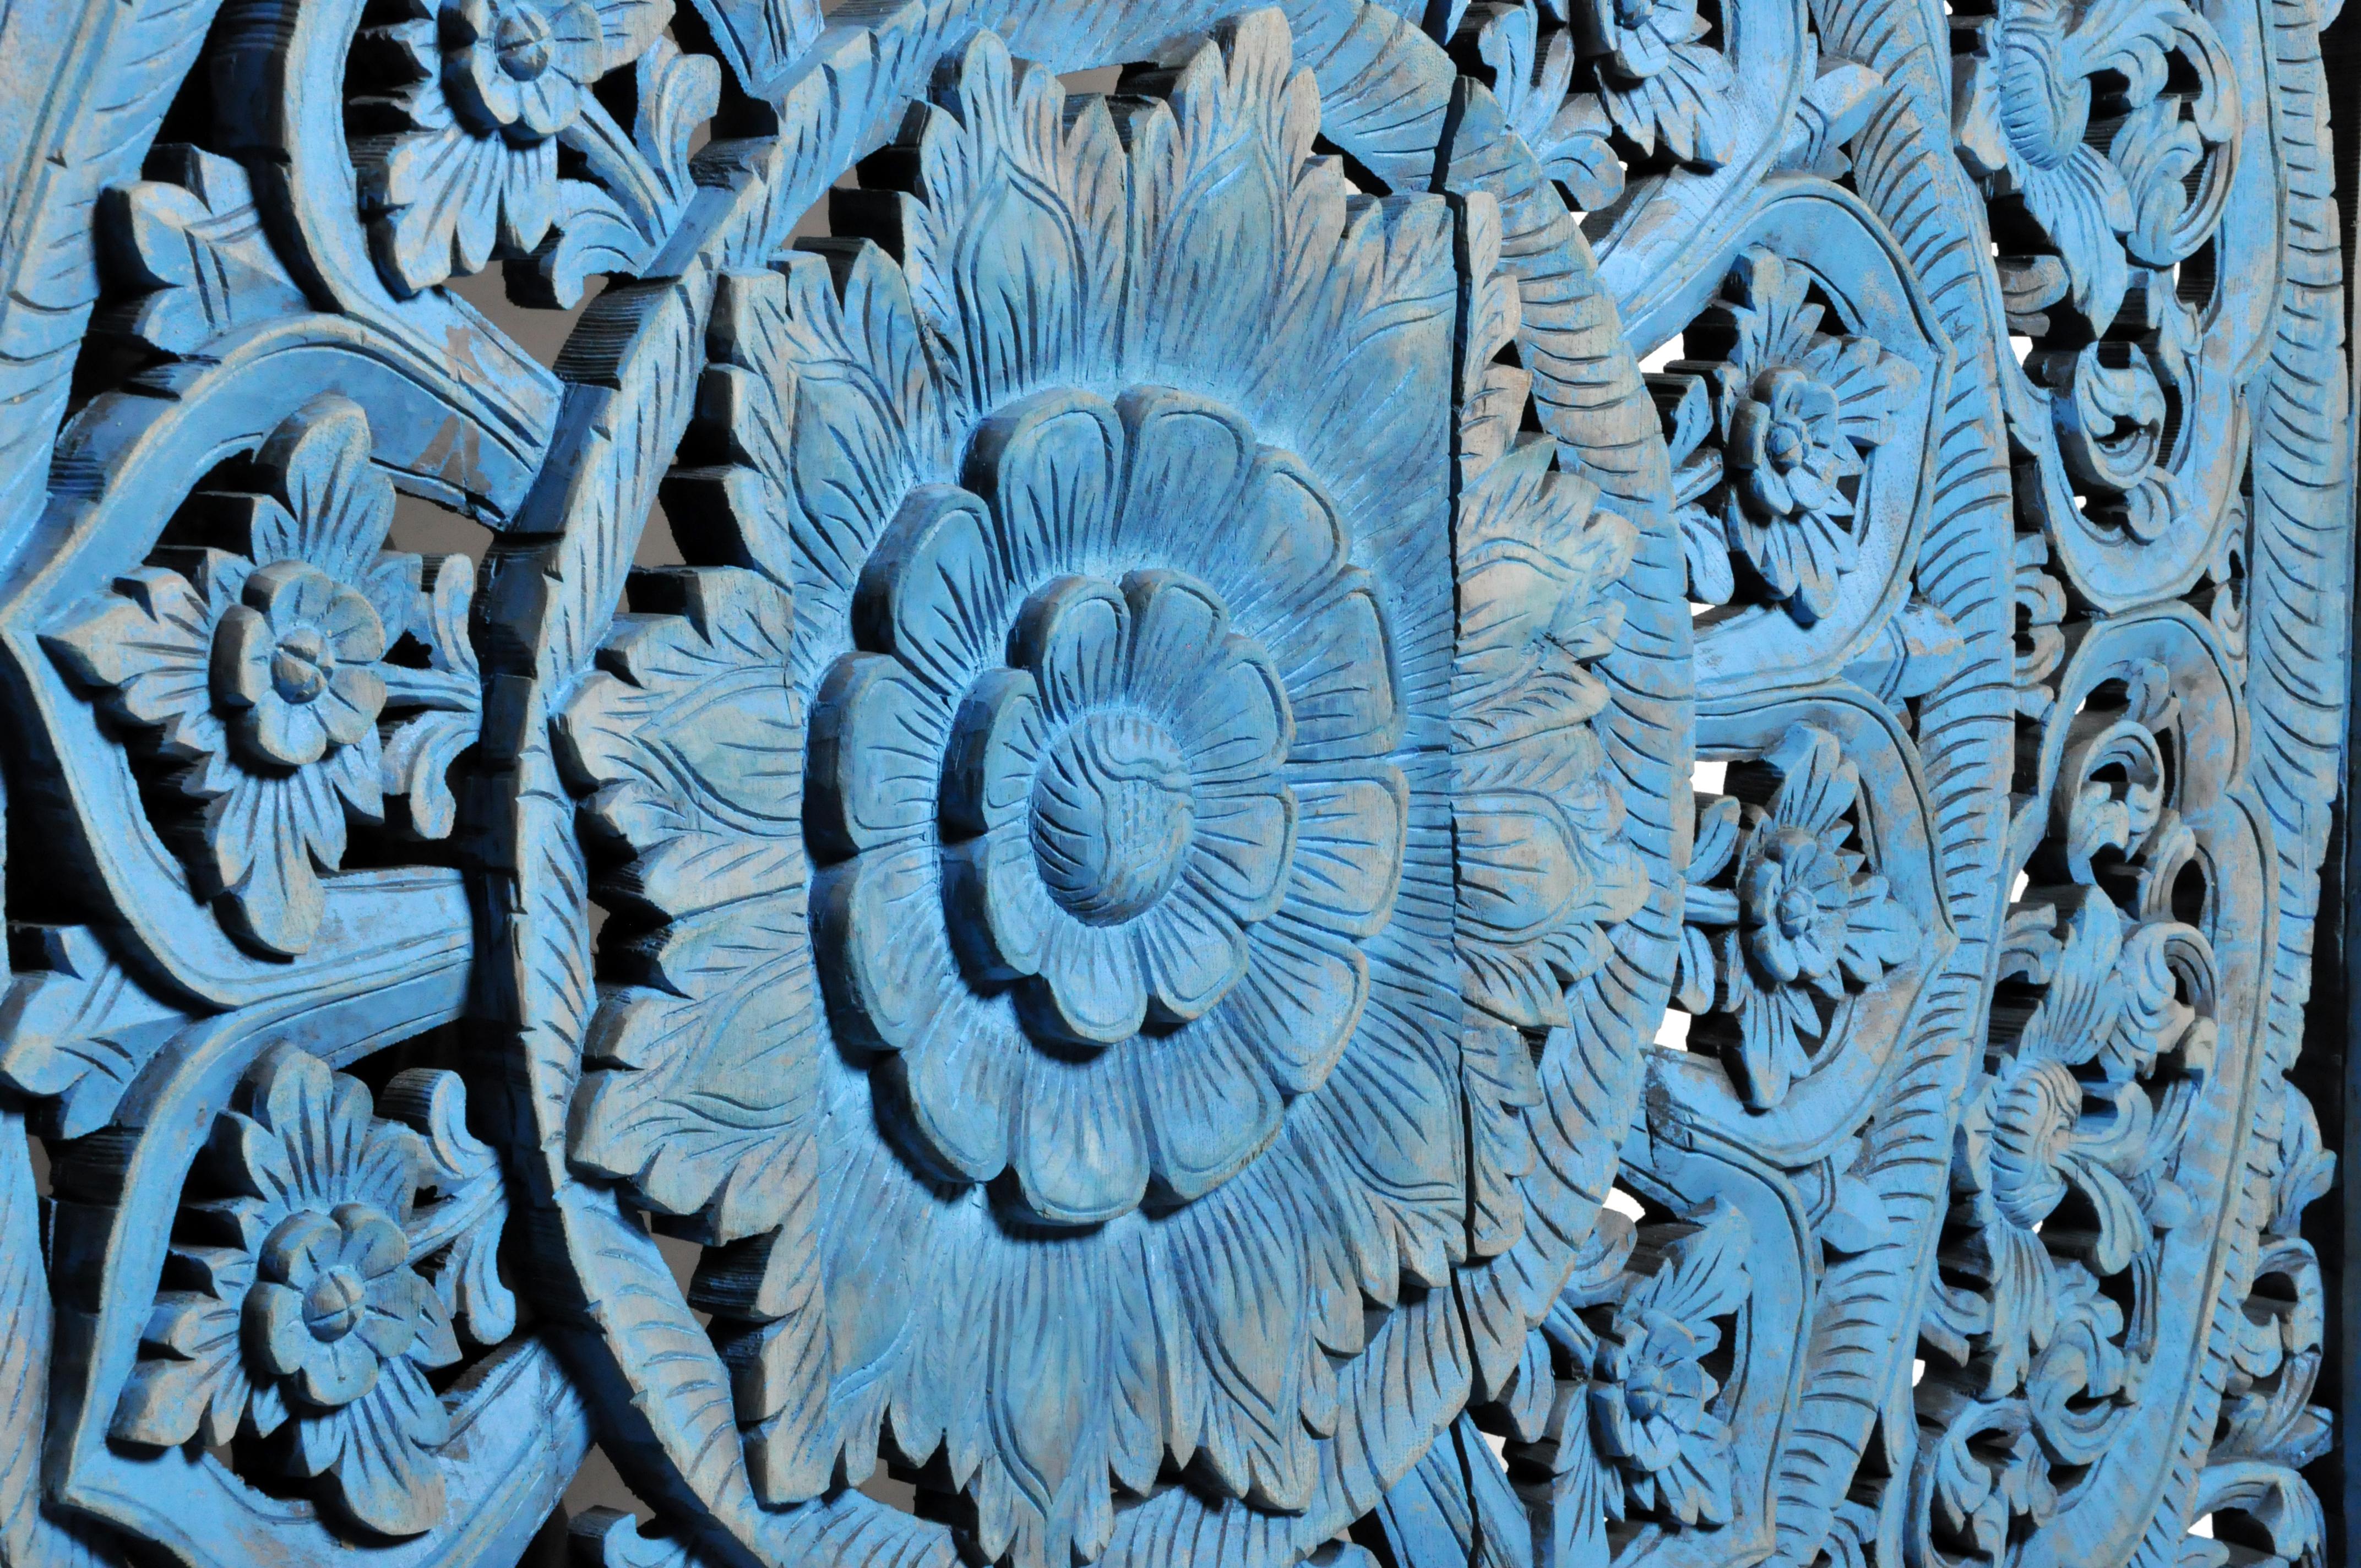 Southeast Asian Wood Carved Flower Panel 14